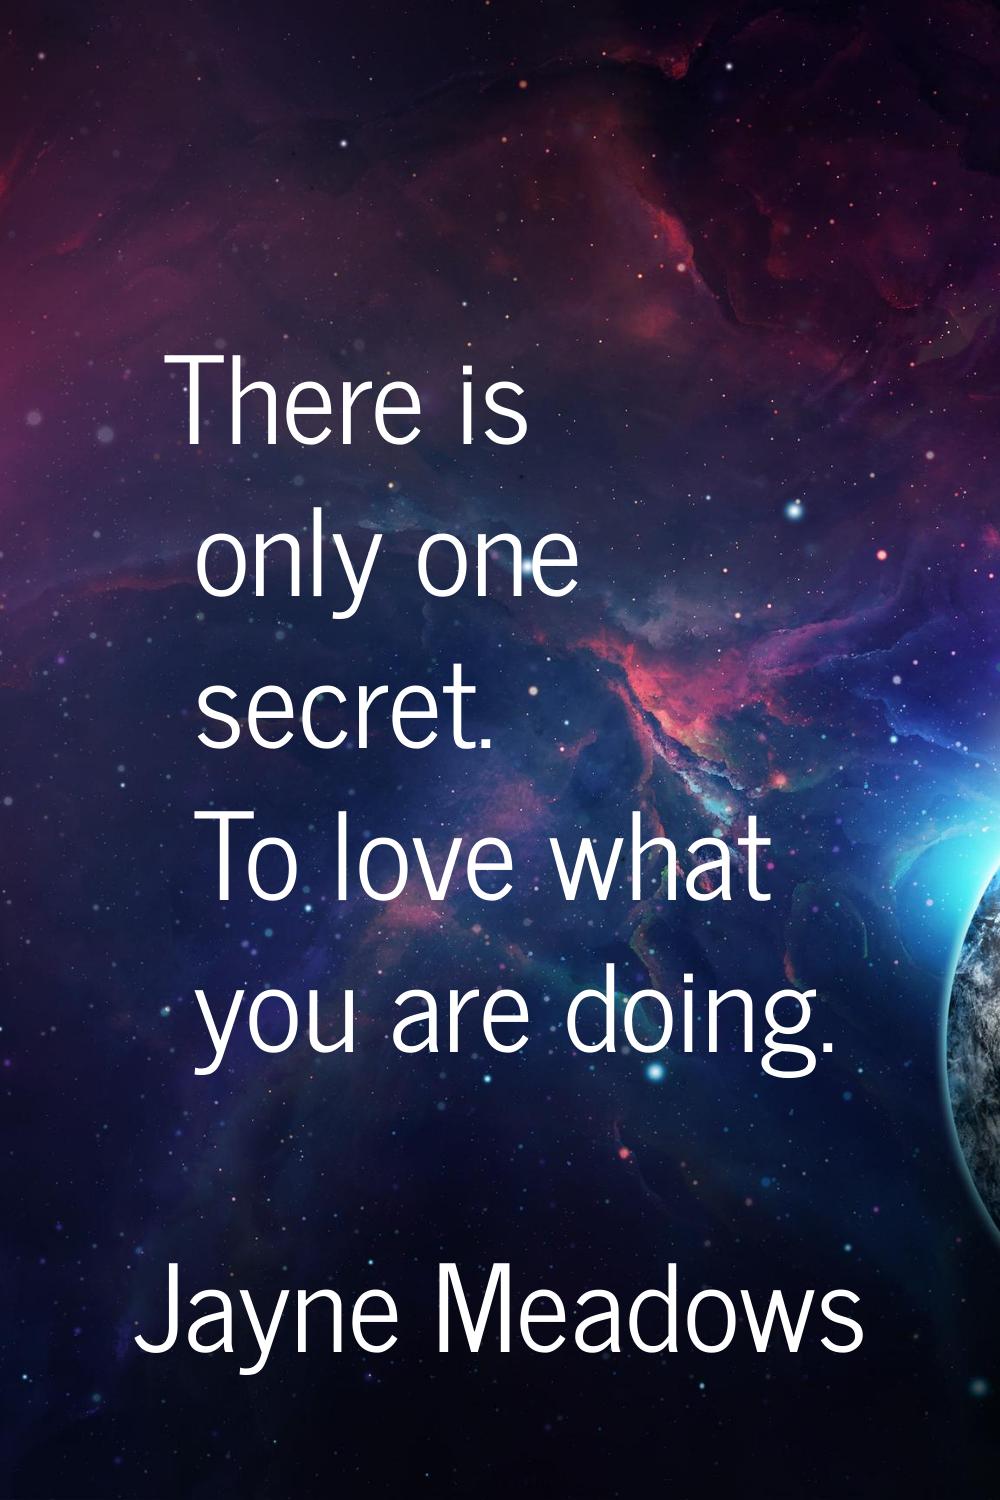 There is only one secret. To love what you are doing.